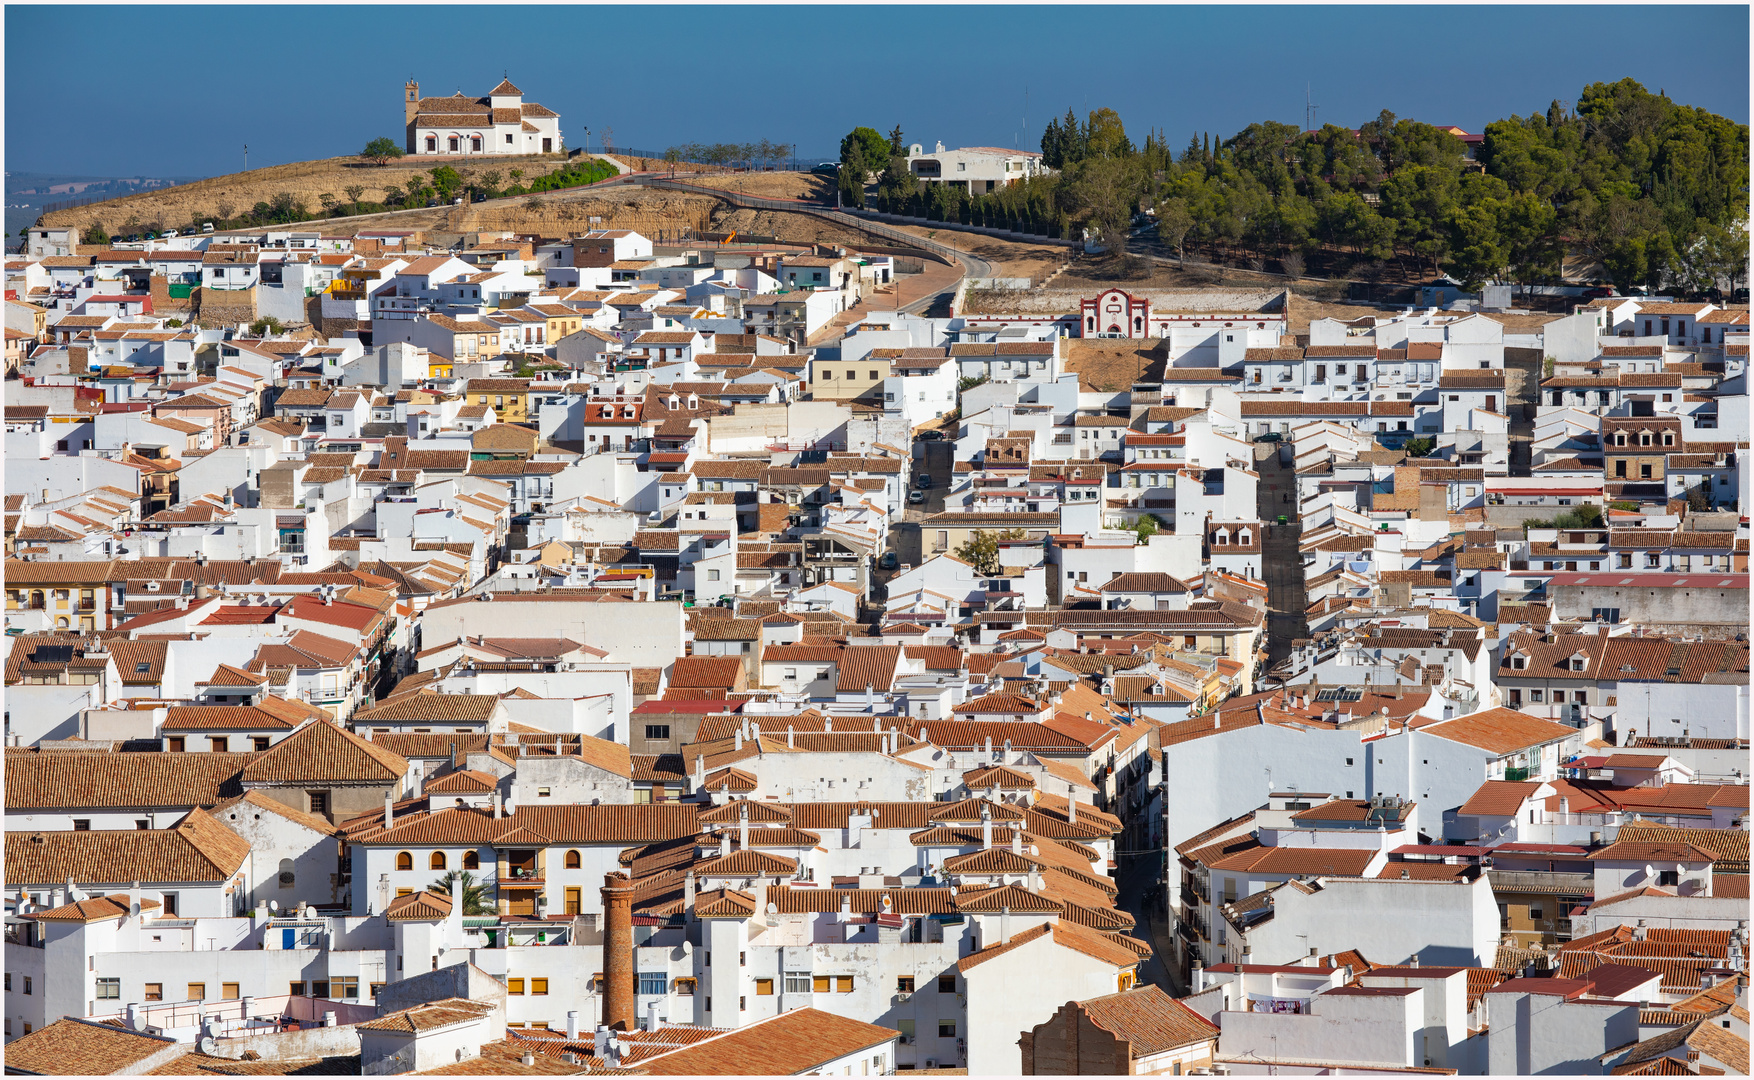 Antequera in Andalusien